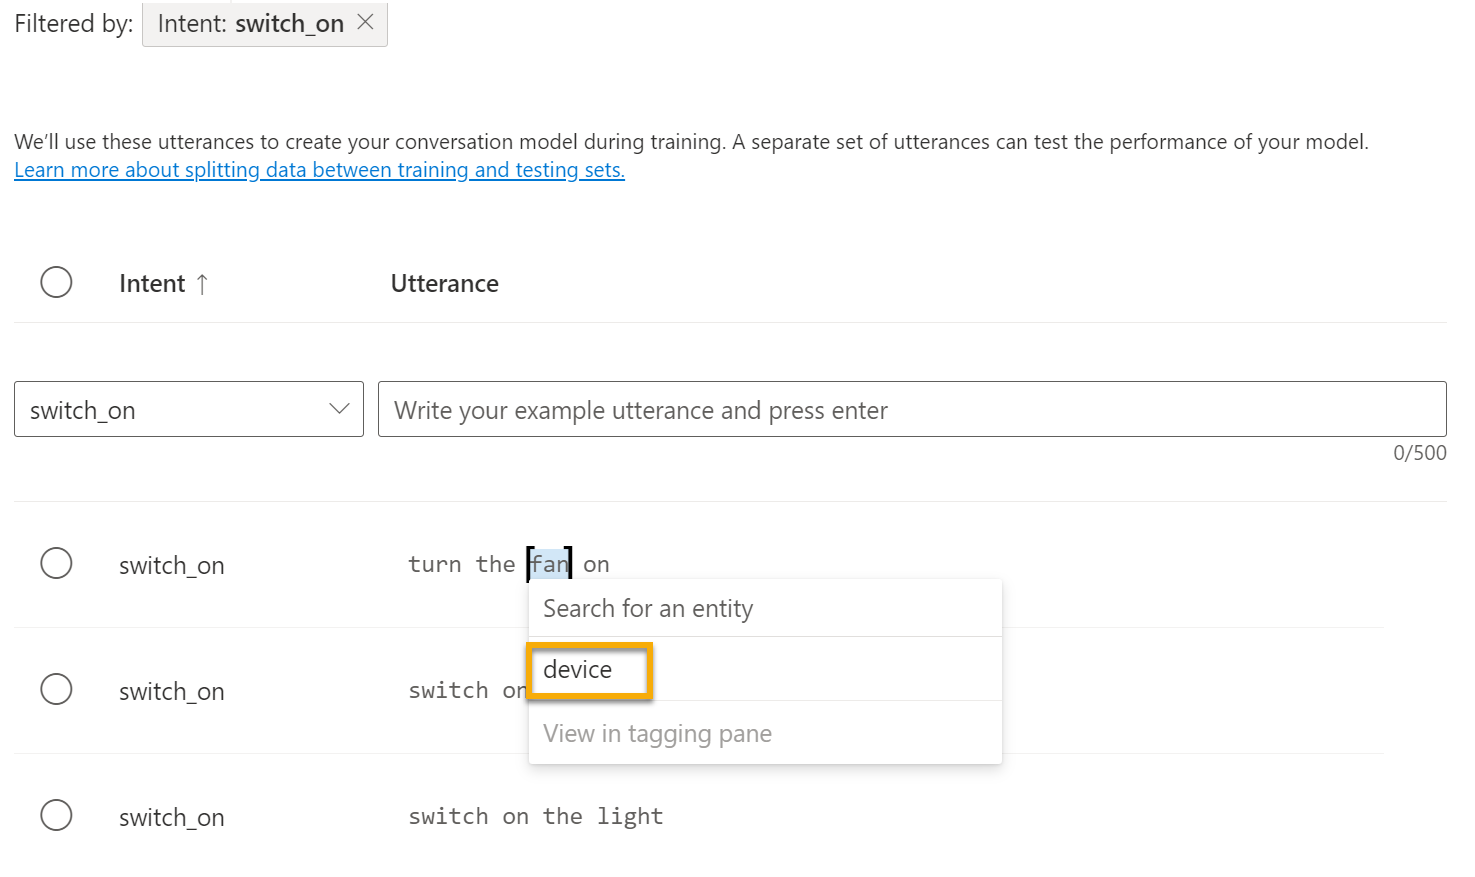 Highlight the word fan in the utterance and select device.